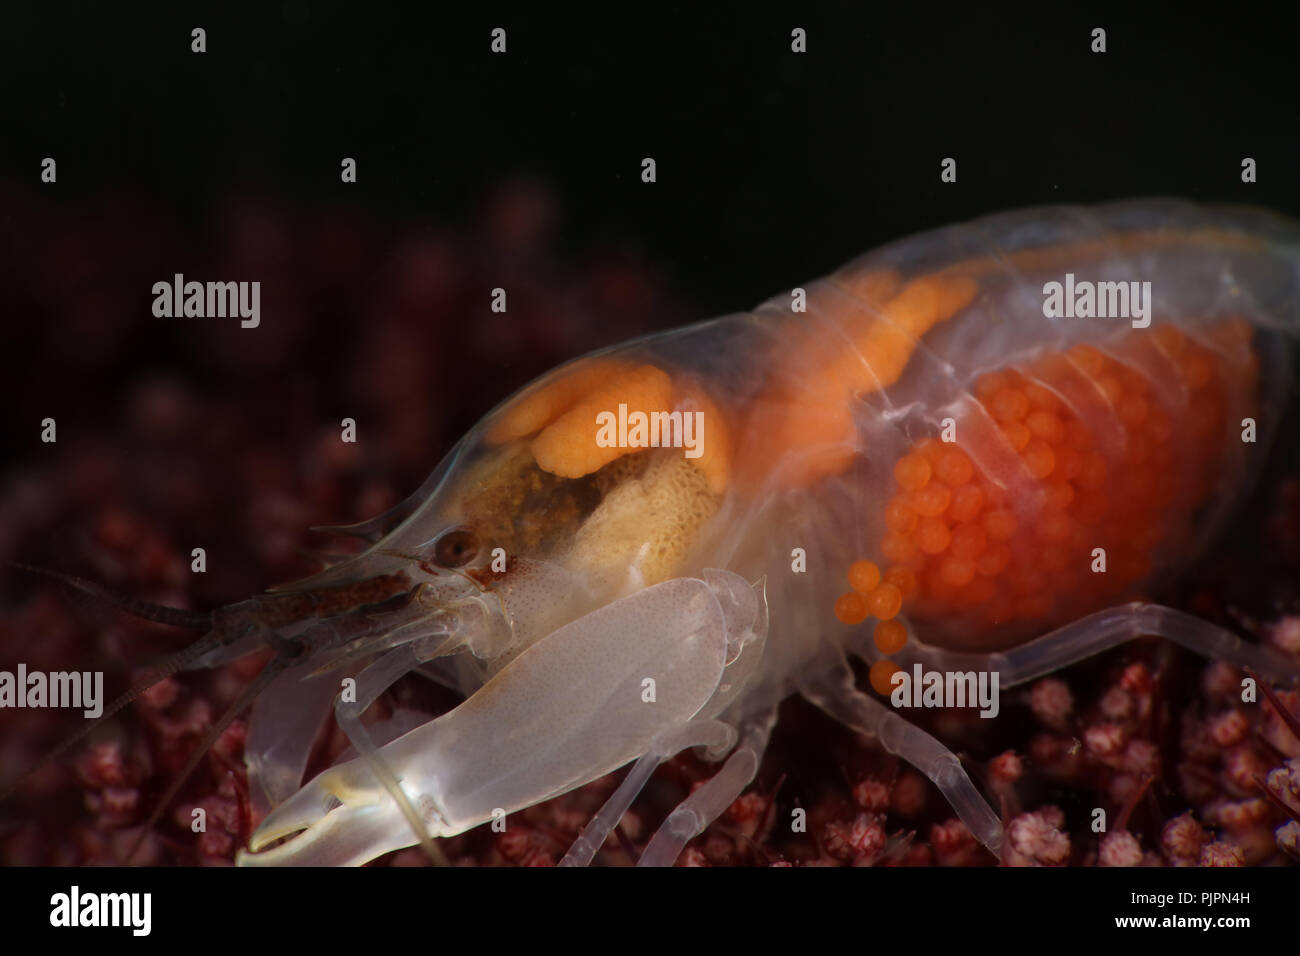 Snapping shrimp  (Synalpheus neomeris) with eggs. Picture was taken in Lembeh strait, Indonesia Stock Photo